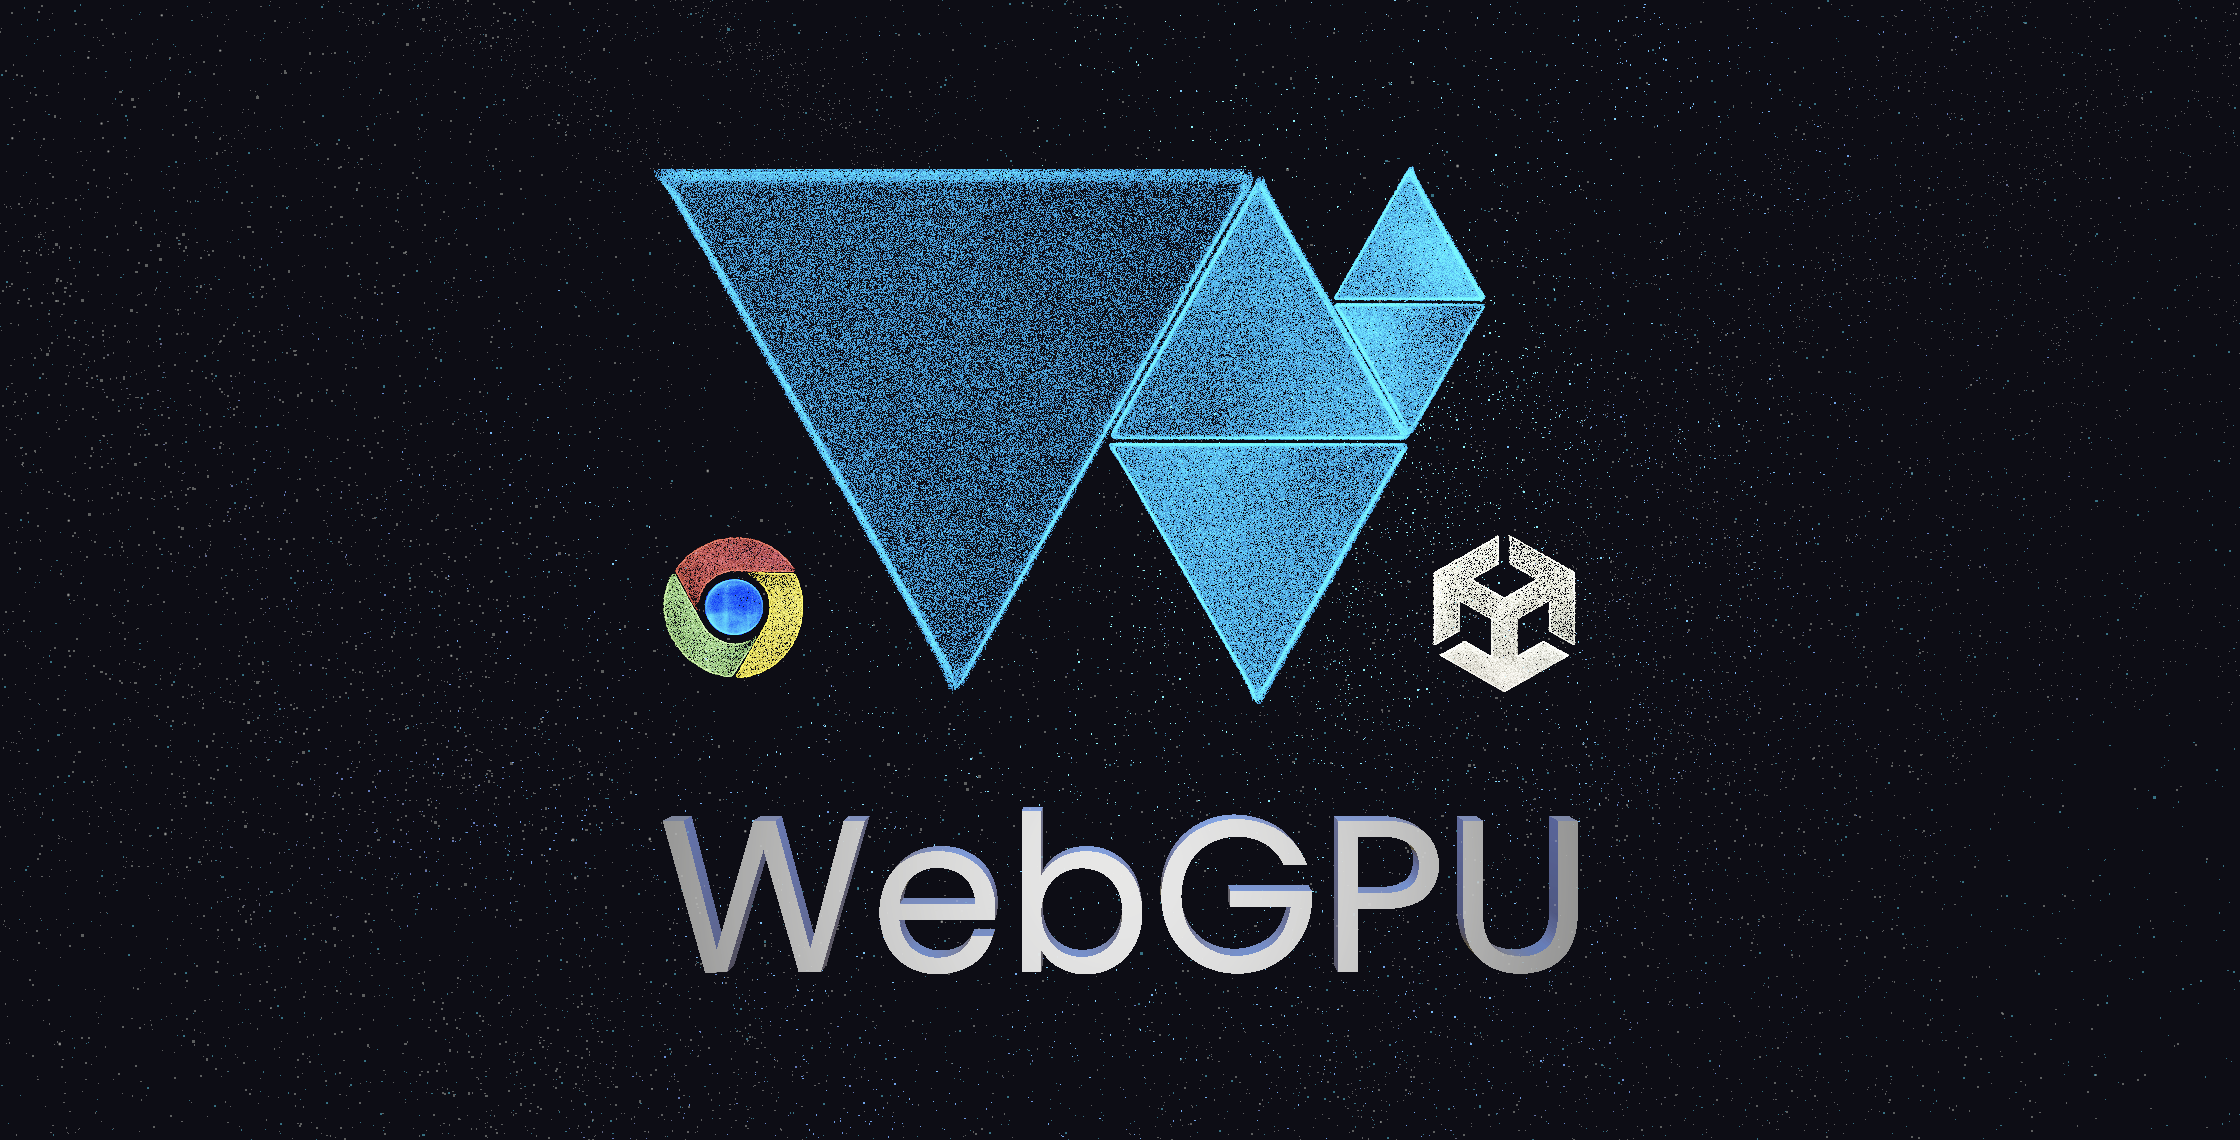 Interactive VFX Graph demo featuring the Google Chrome logo, the Unity cube icon, and the WebGPU logo.